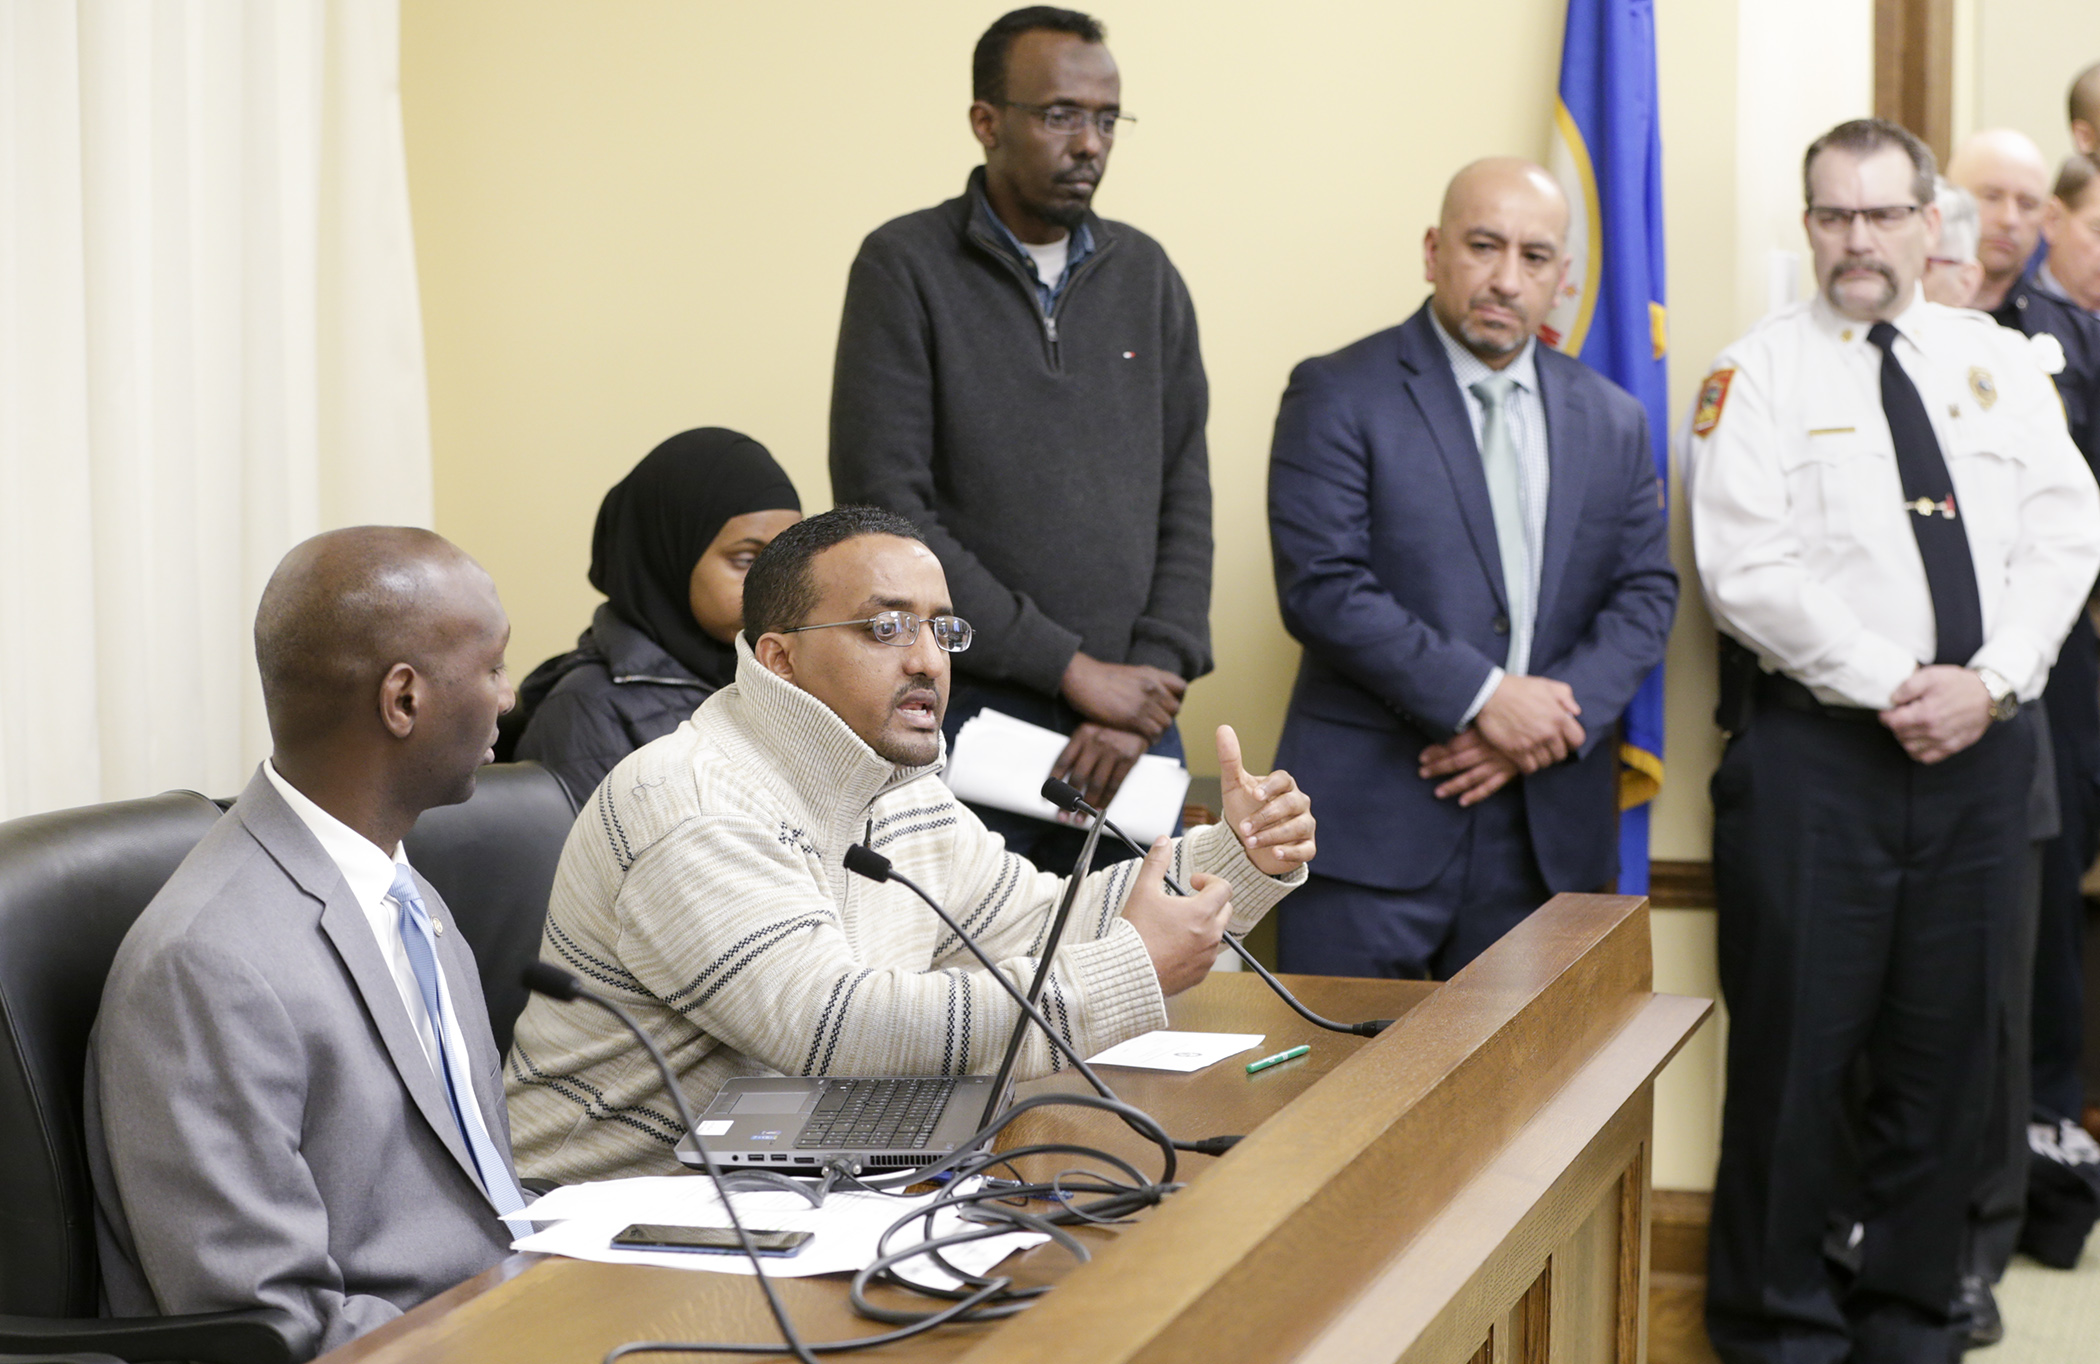 Hassanen Mohamed provides emotional testimony on HF3003 that would require automatic sprinkler systems be installed in certain existing high-rise  buildings. Rep. Mohamud Noor, left, sponsors the bill. Photo by Paul Battaglia 